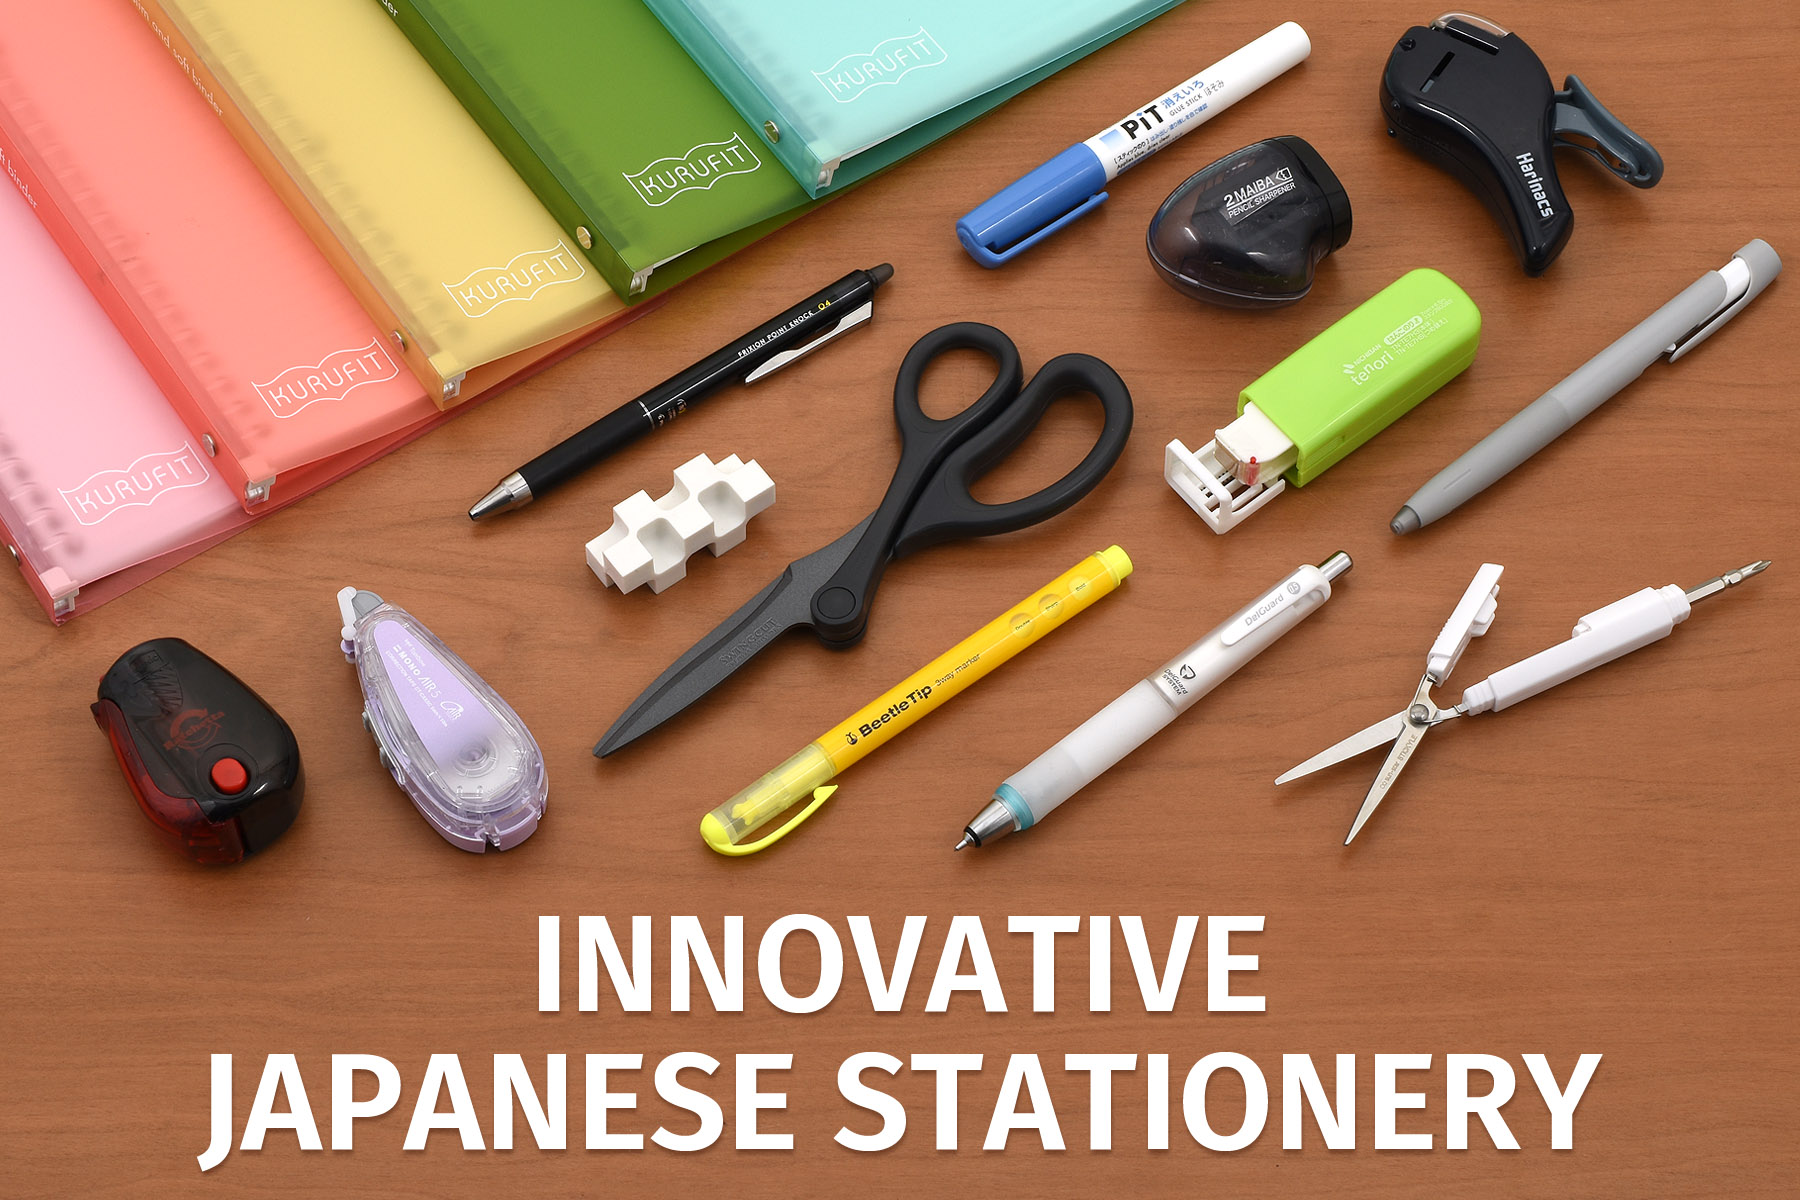 Cultural Gadget Differences: Strange Japanese Must-Haves